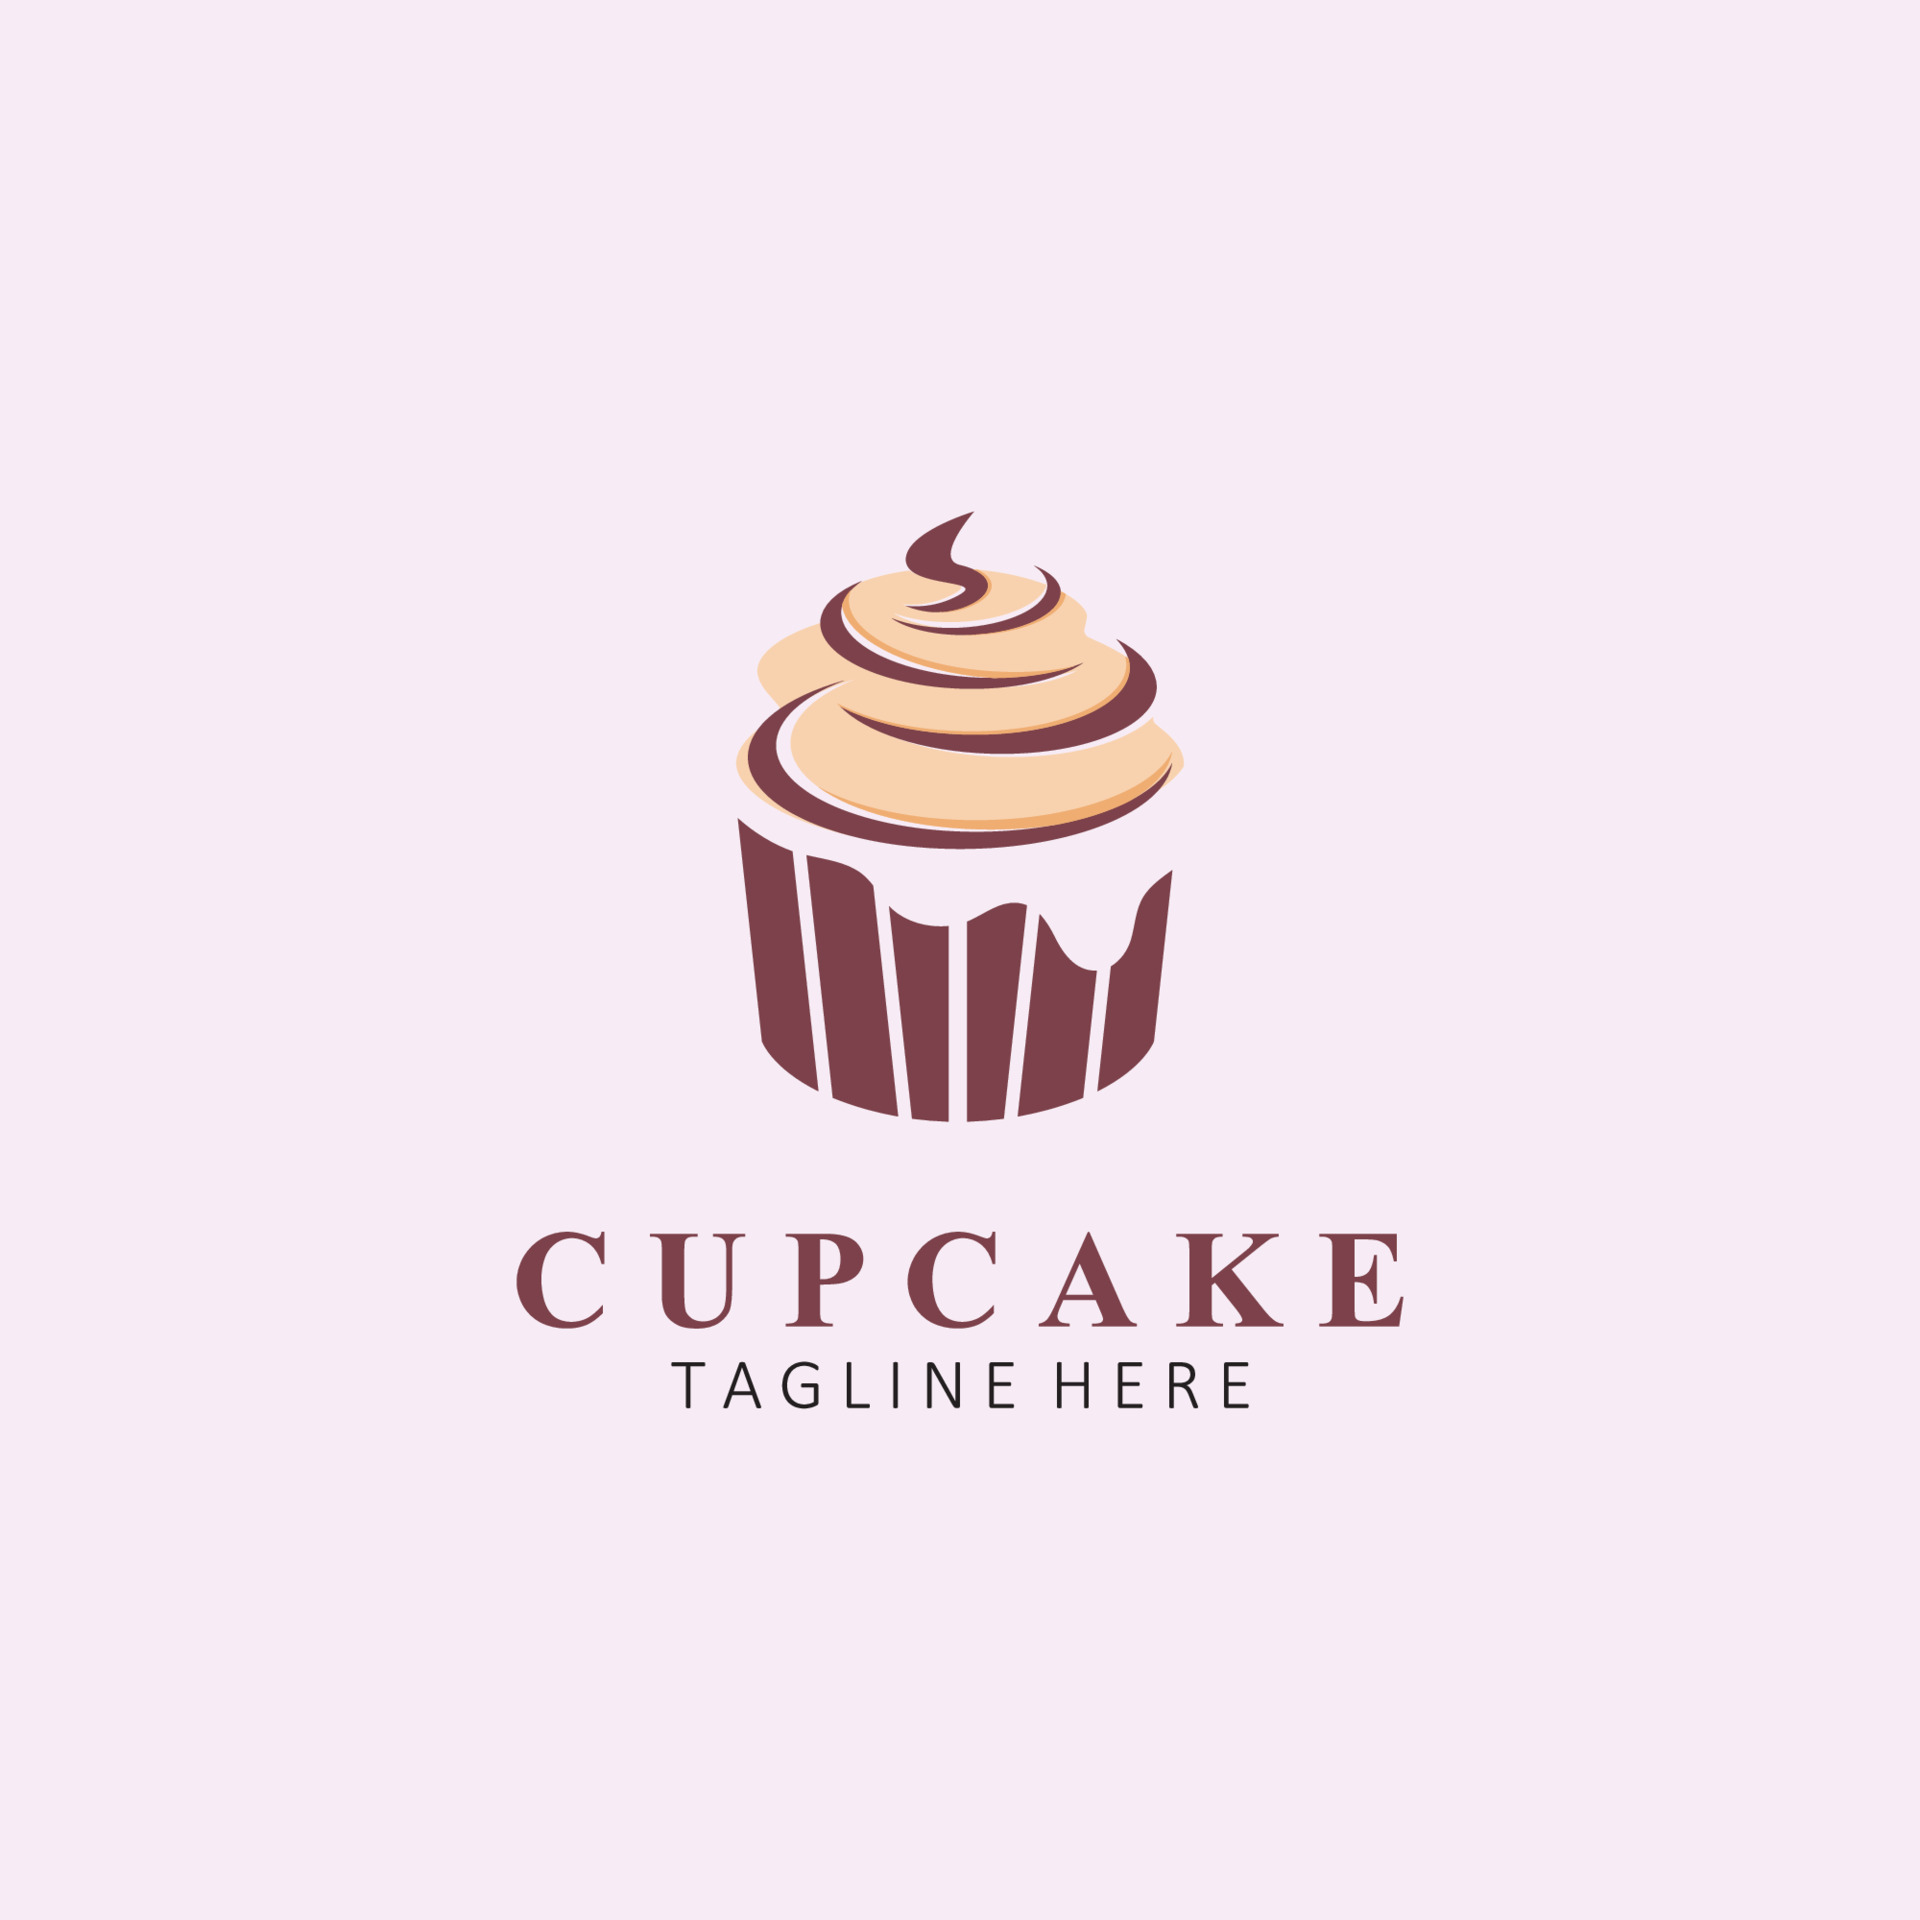 Out here to get a Cupcake EDP445 | Sticker